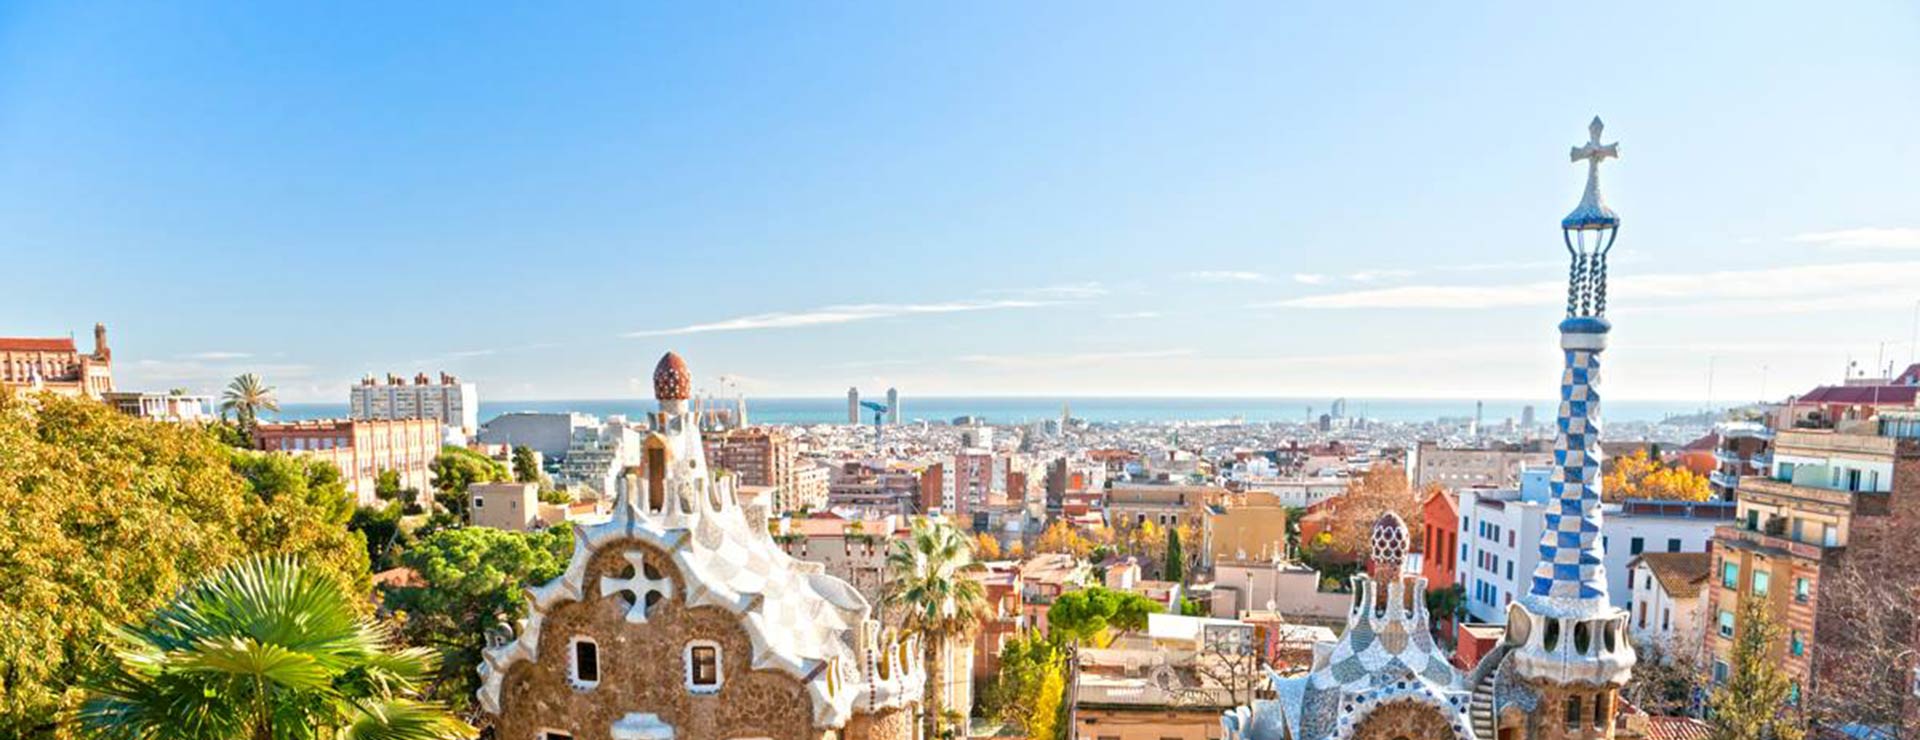 The top 10 places in Barcelona: enjoy the city!